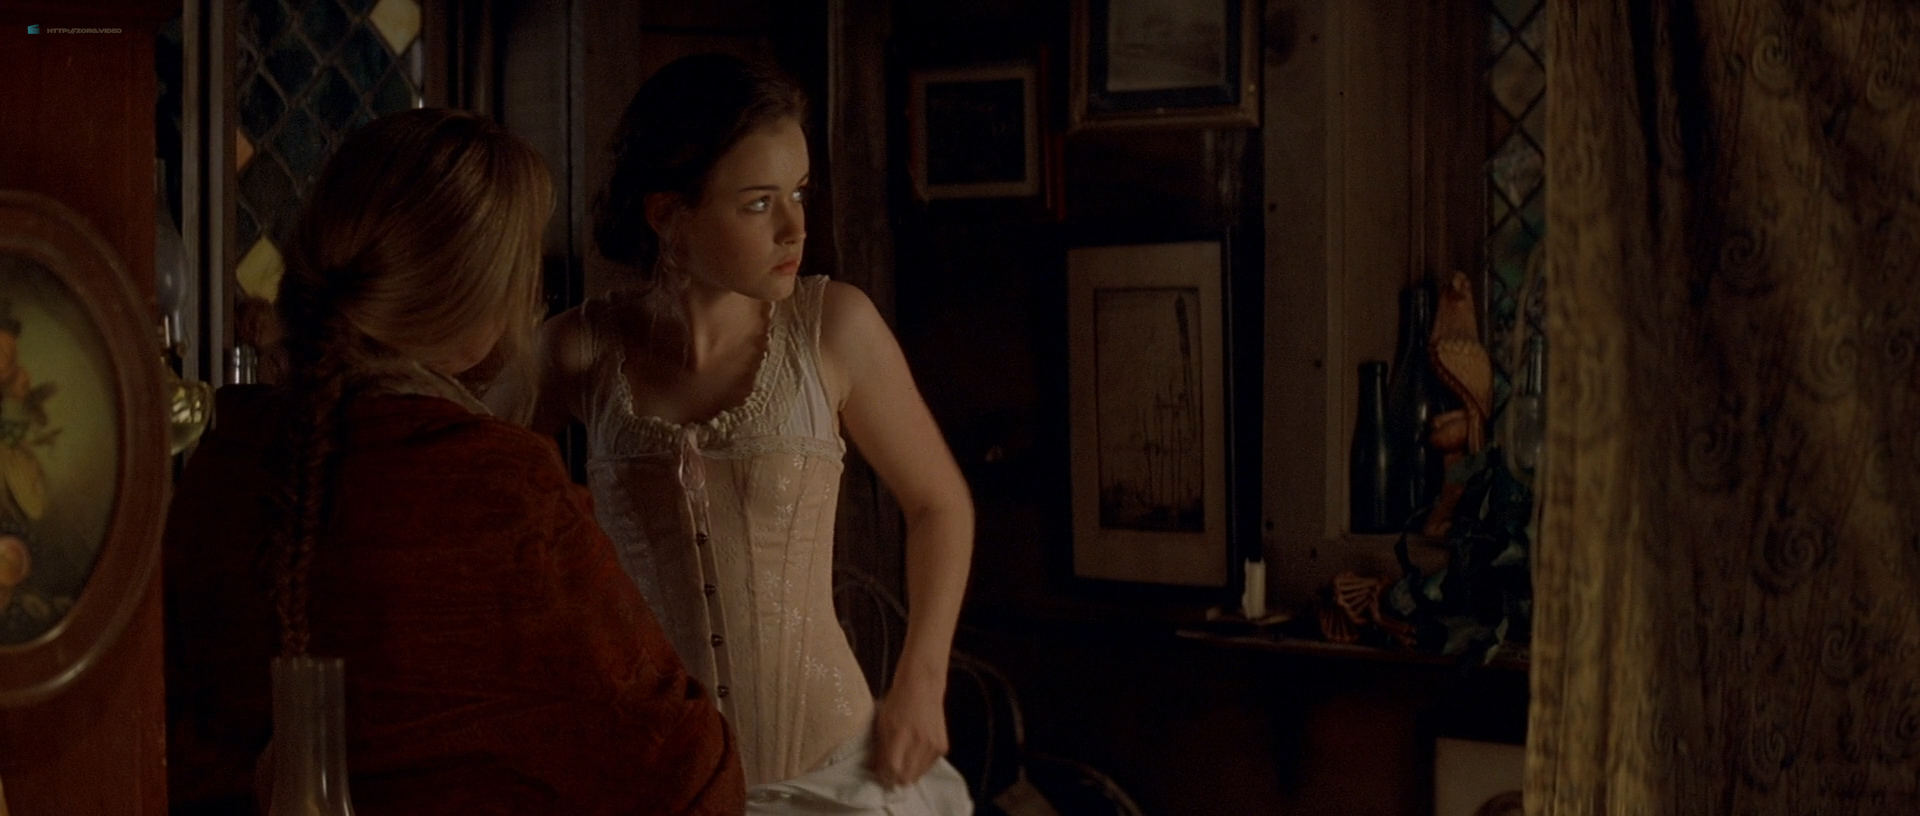 Alexis Bledel hot and sexy - Tuck Everlasting (2002) HD 1080p. 